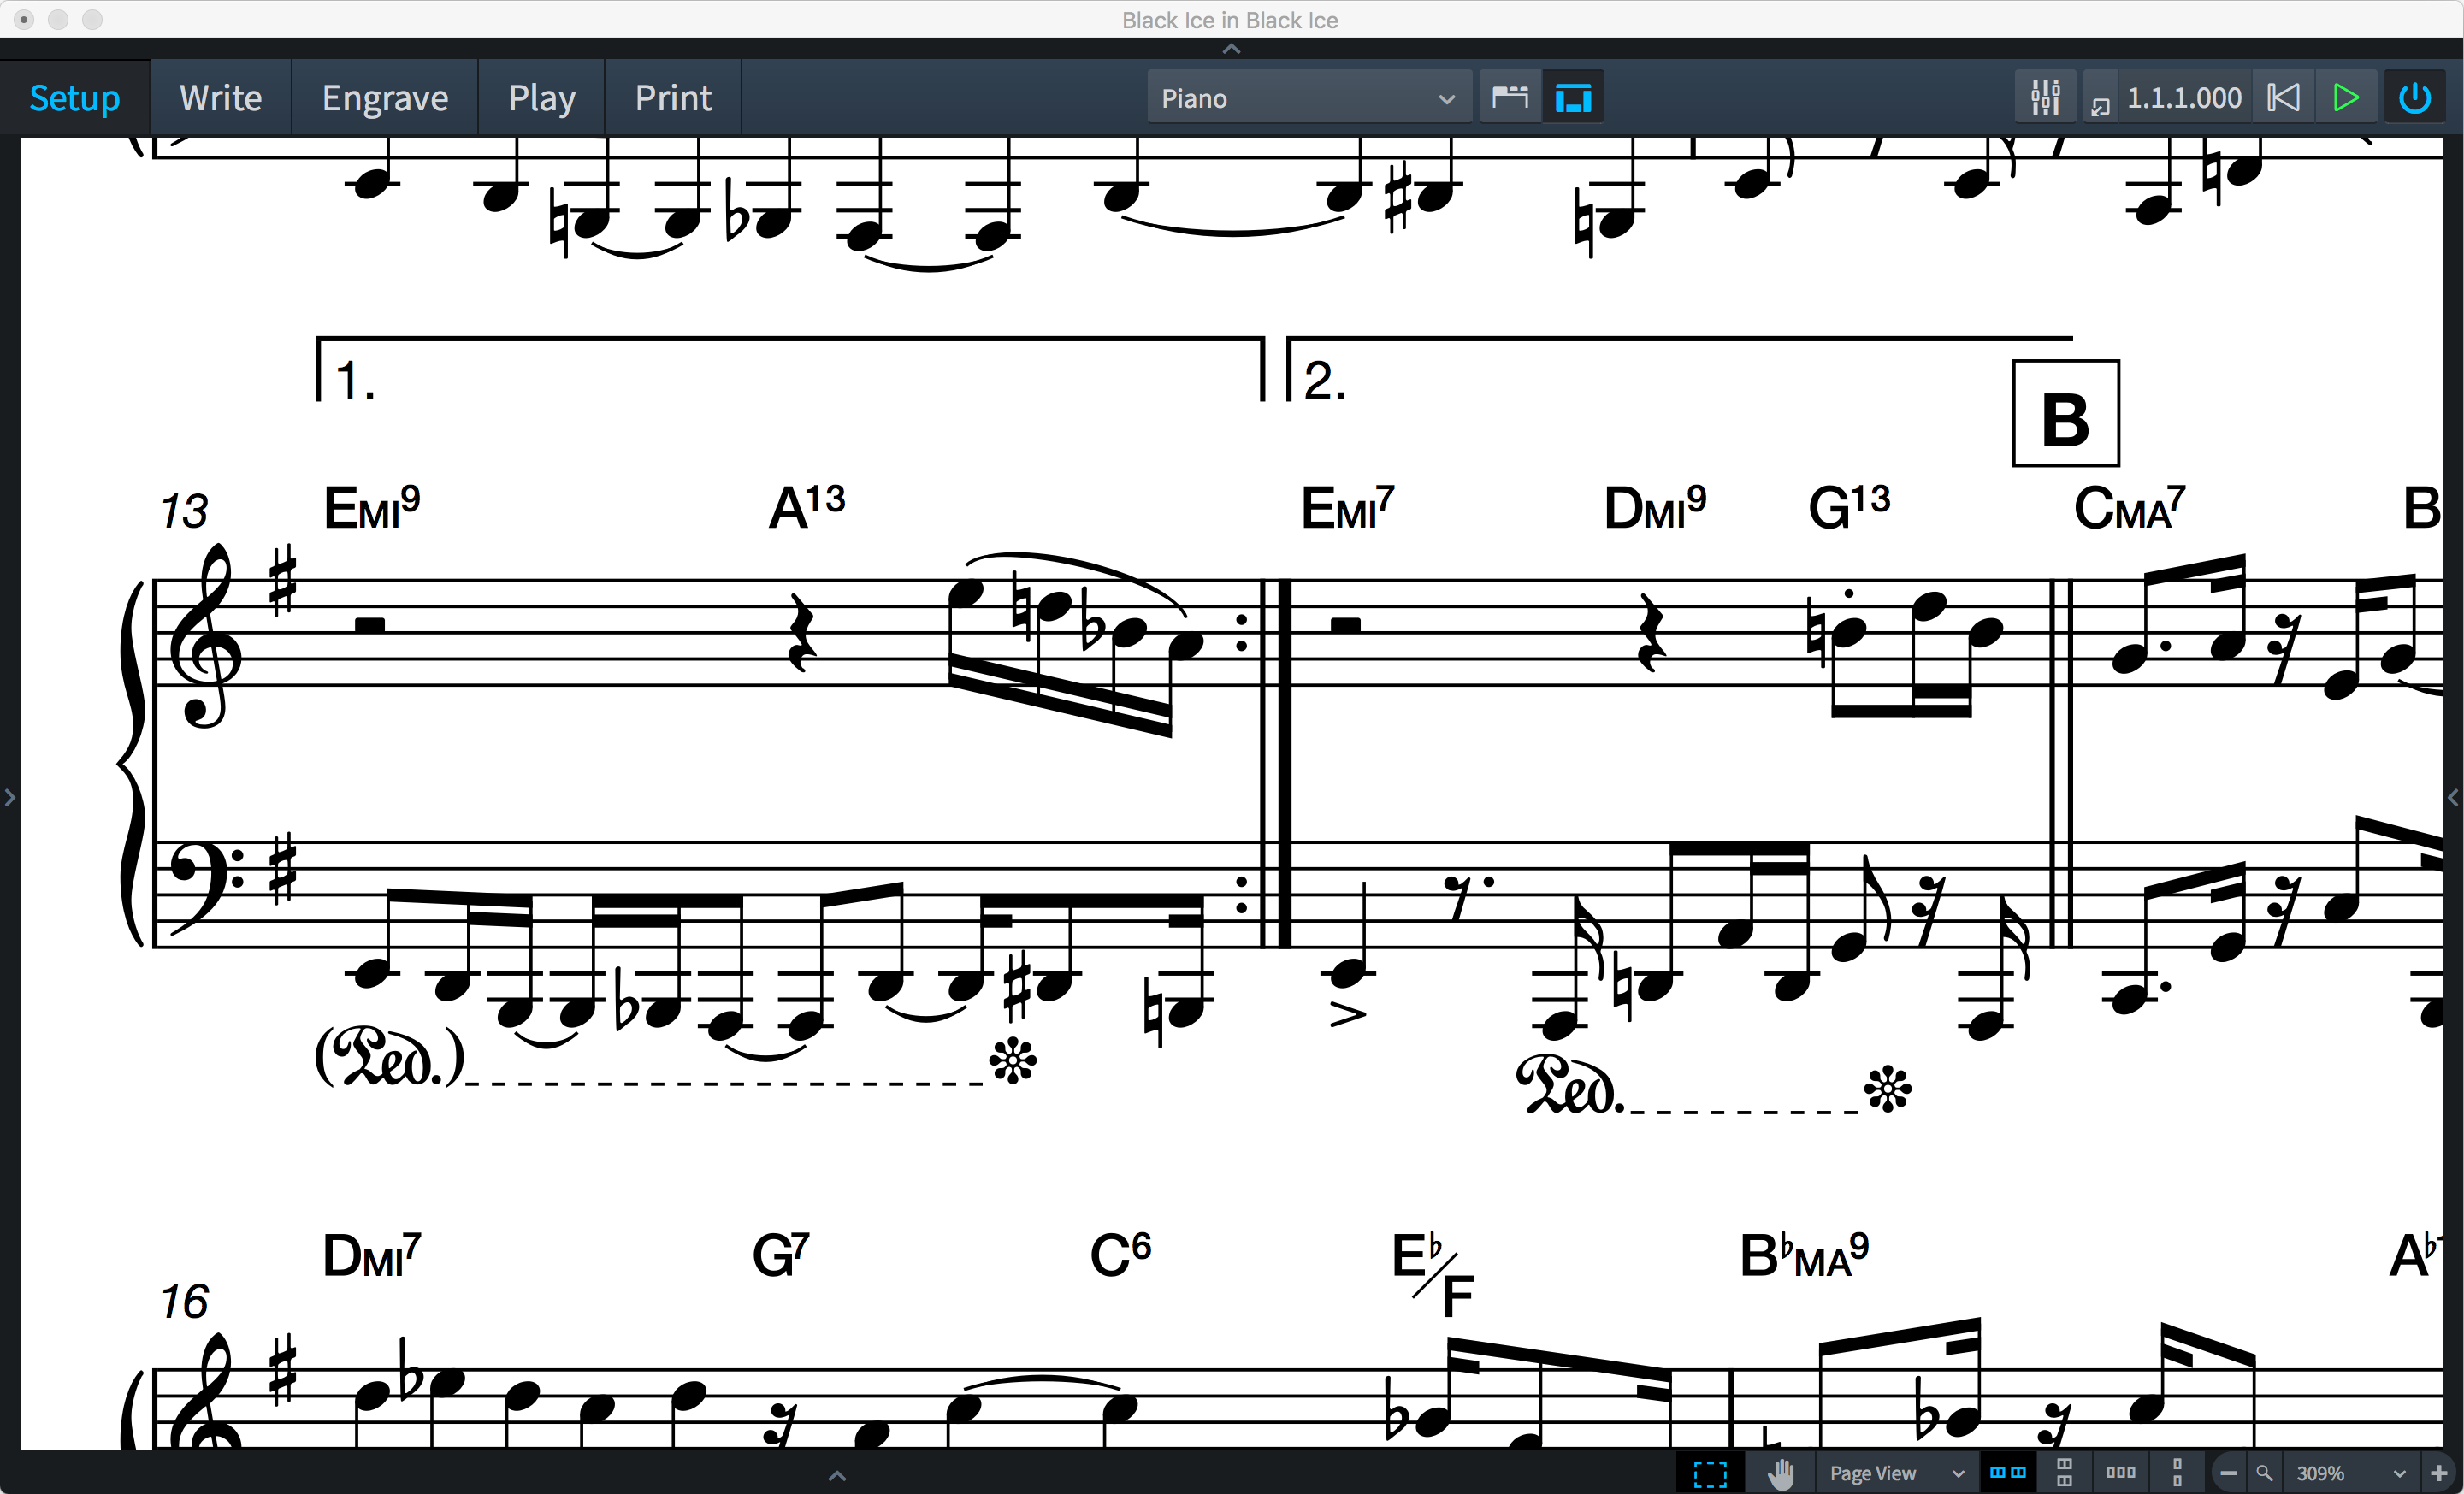 Dorico 1.1 released with chord symbols, repeat endings and much more